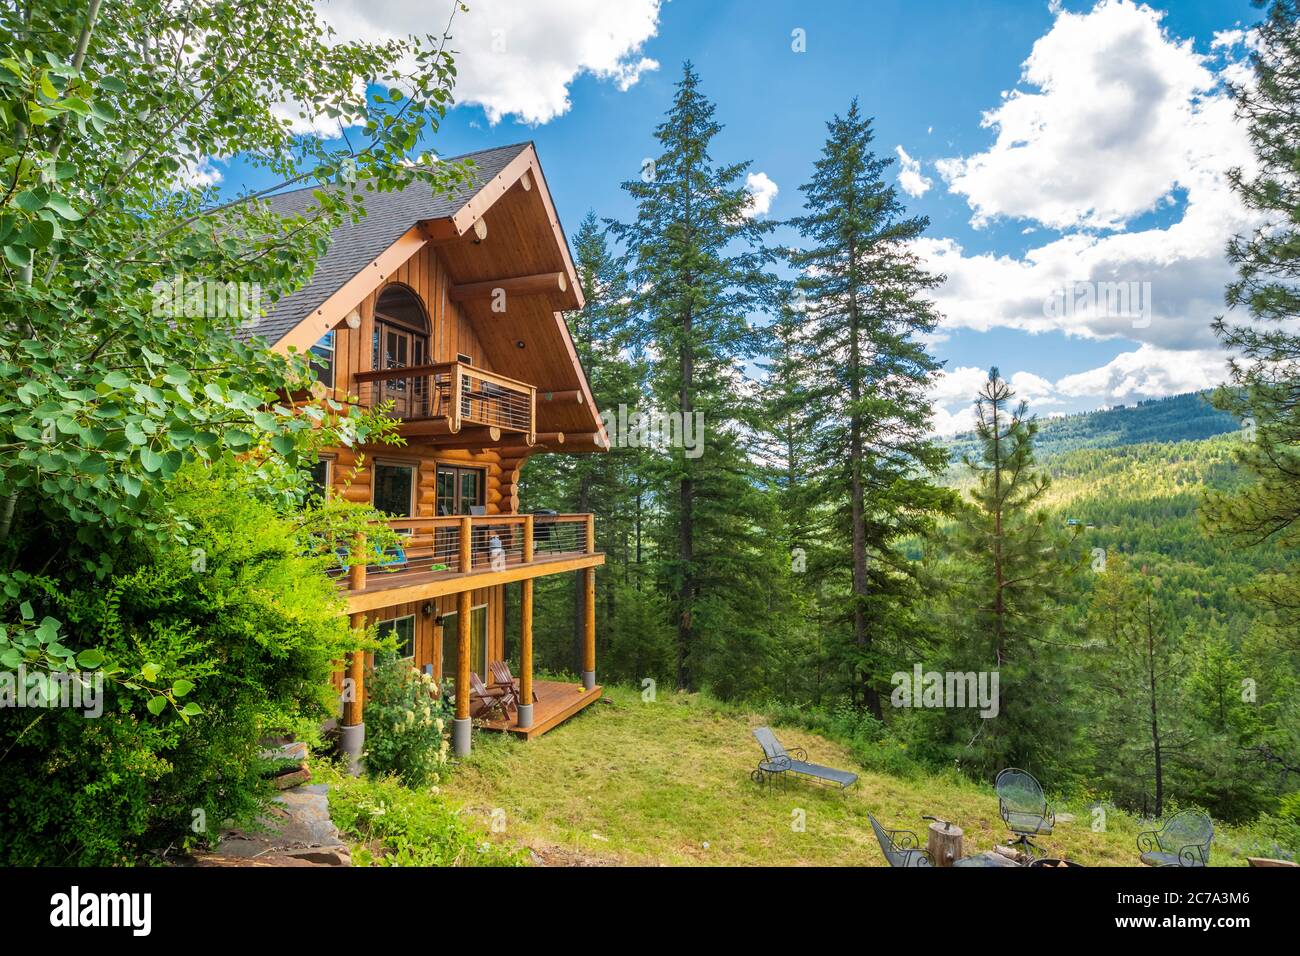 An upscale rural log home on a hillside in the mountains near Sandpoint, Idaho, USA, during summer. Stock Photo